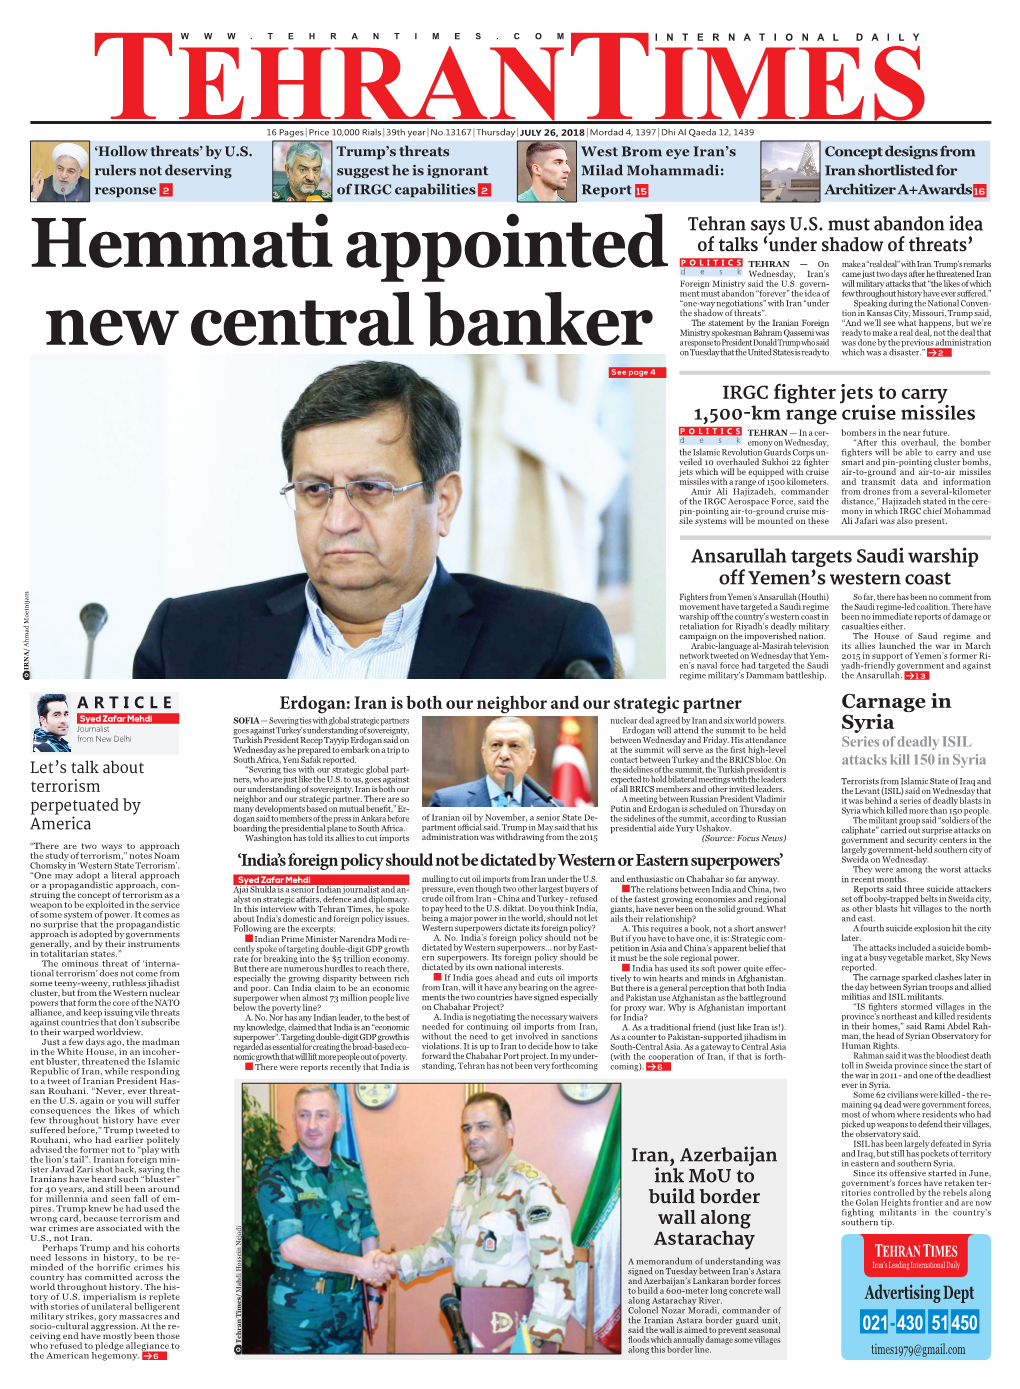 Hemmati Appointed New Central Banker